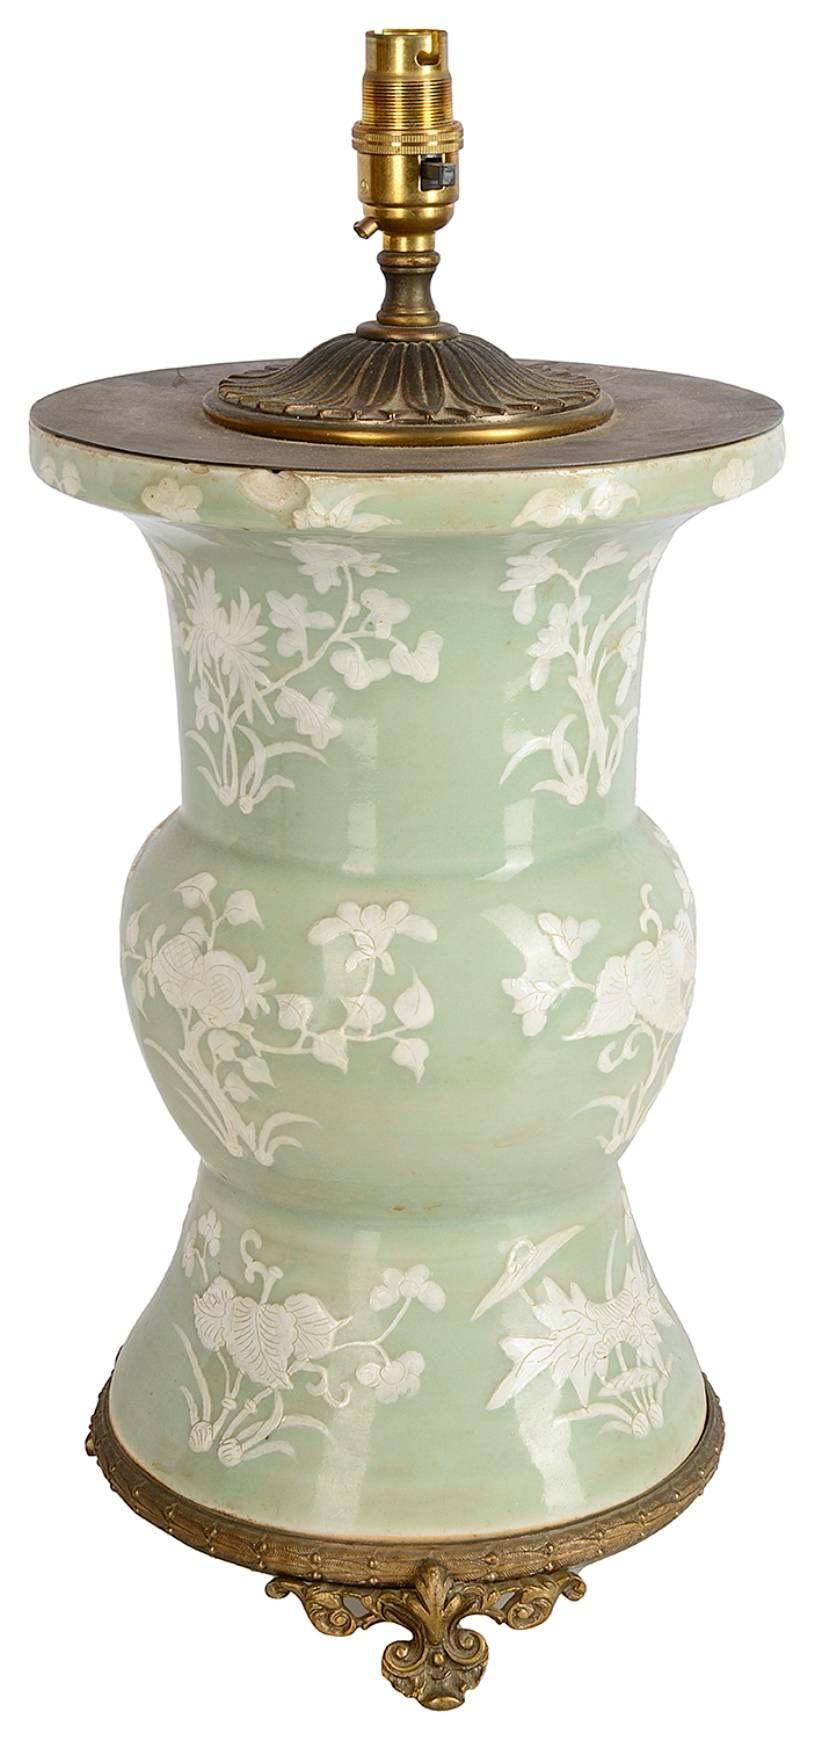 A good quality 19th century Chinese celadon vase or lamp, having floral decoration and mounted in an ormolu base and a top.